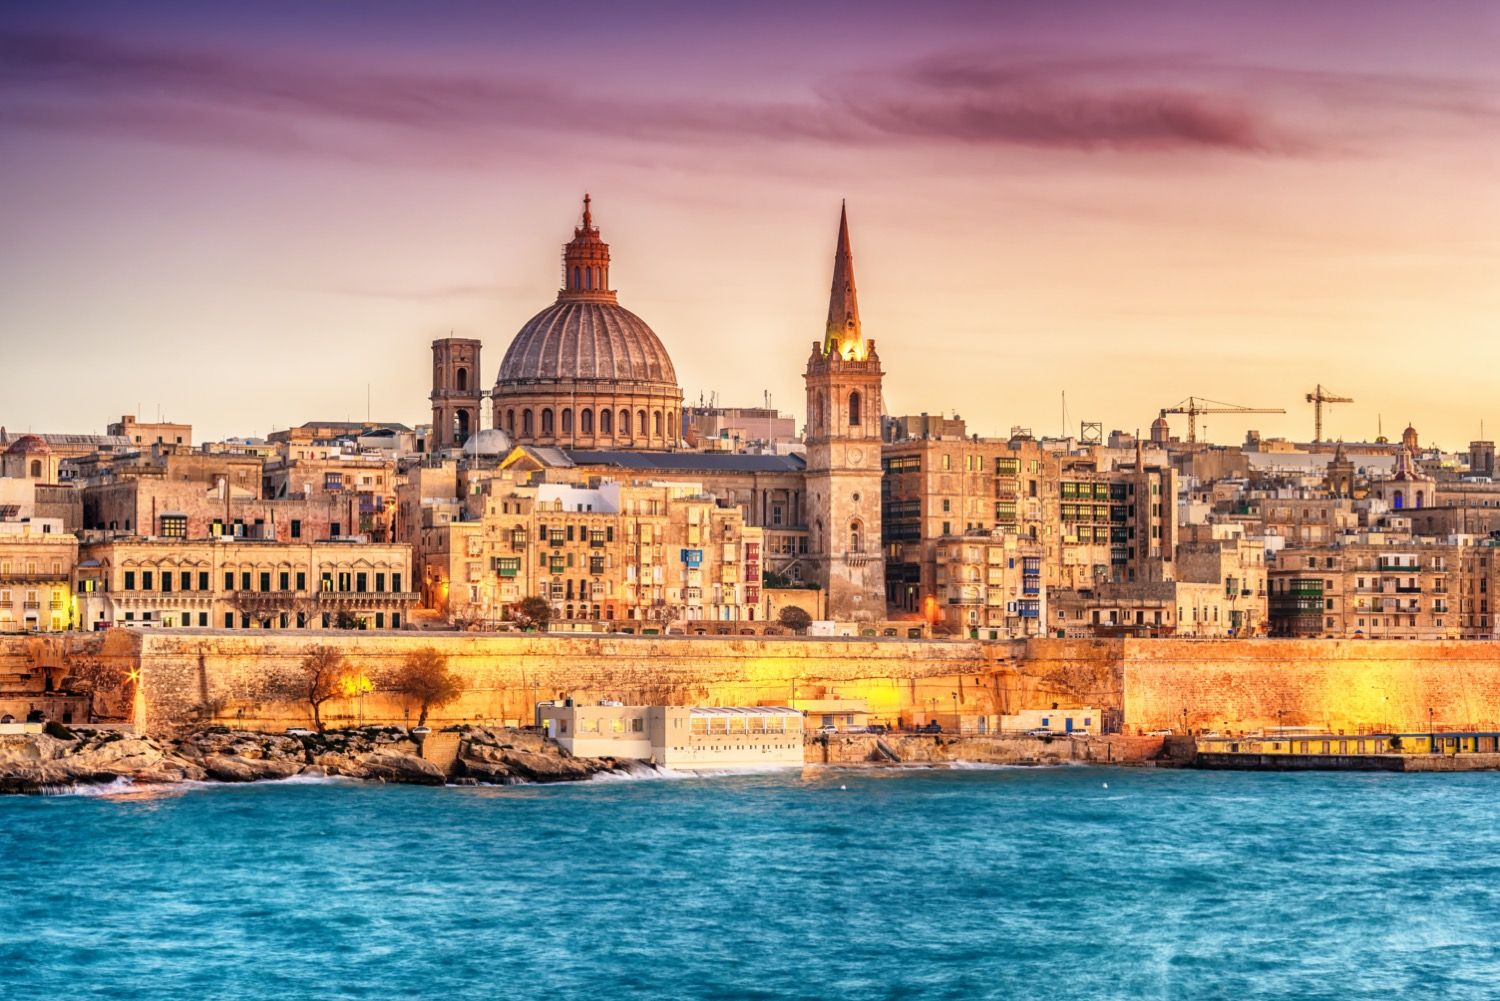 Poker Returns to Malta with the Battle of Malta in October